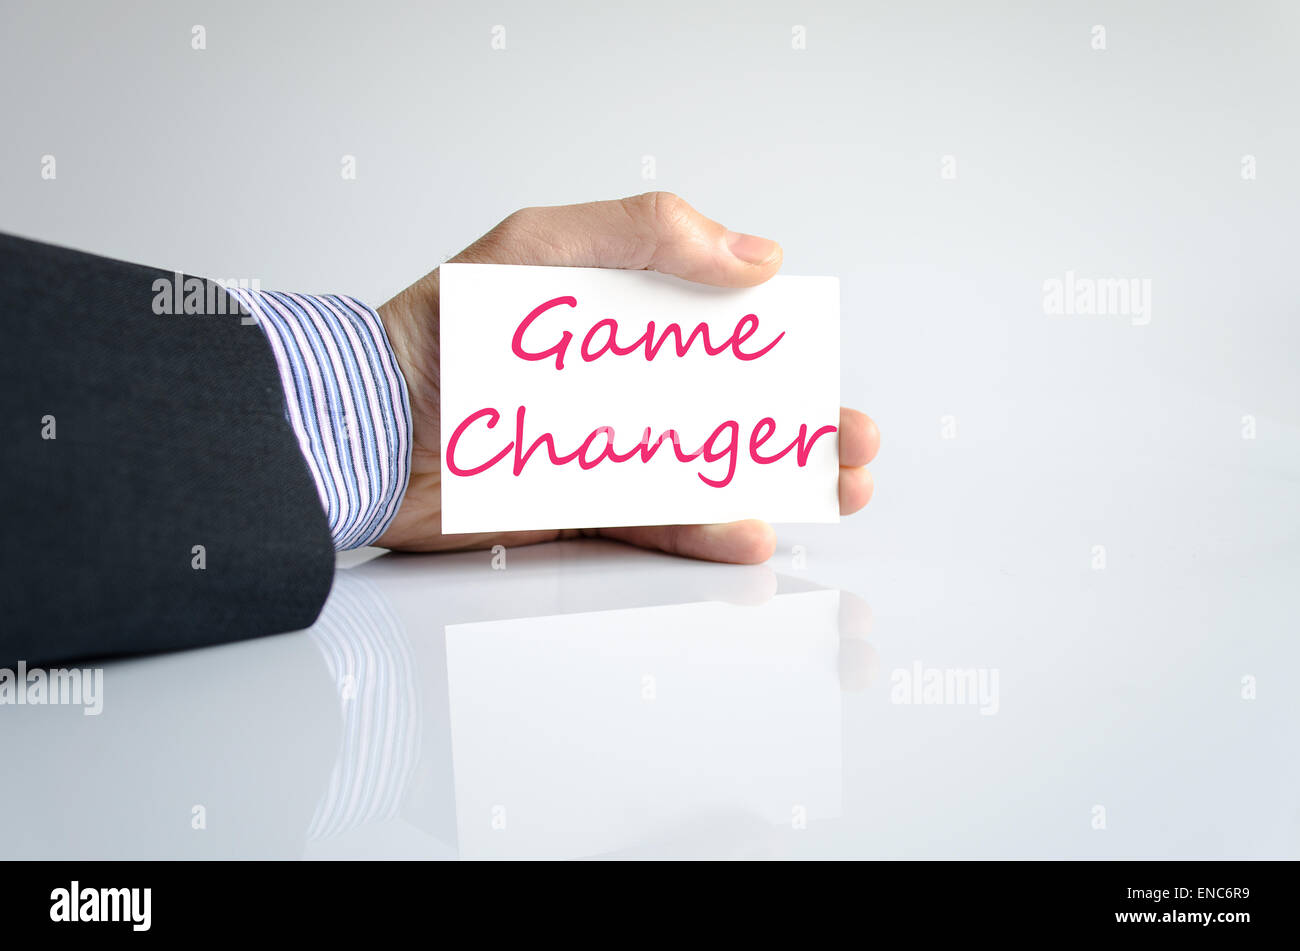 Bussines man hand writing game changer Stock Photo